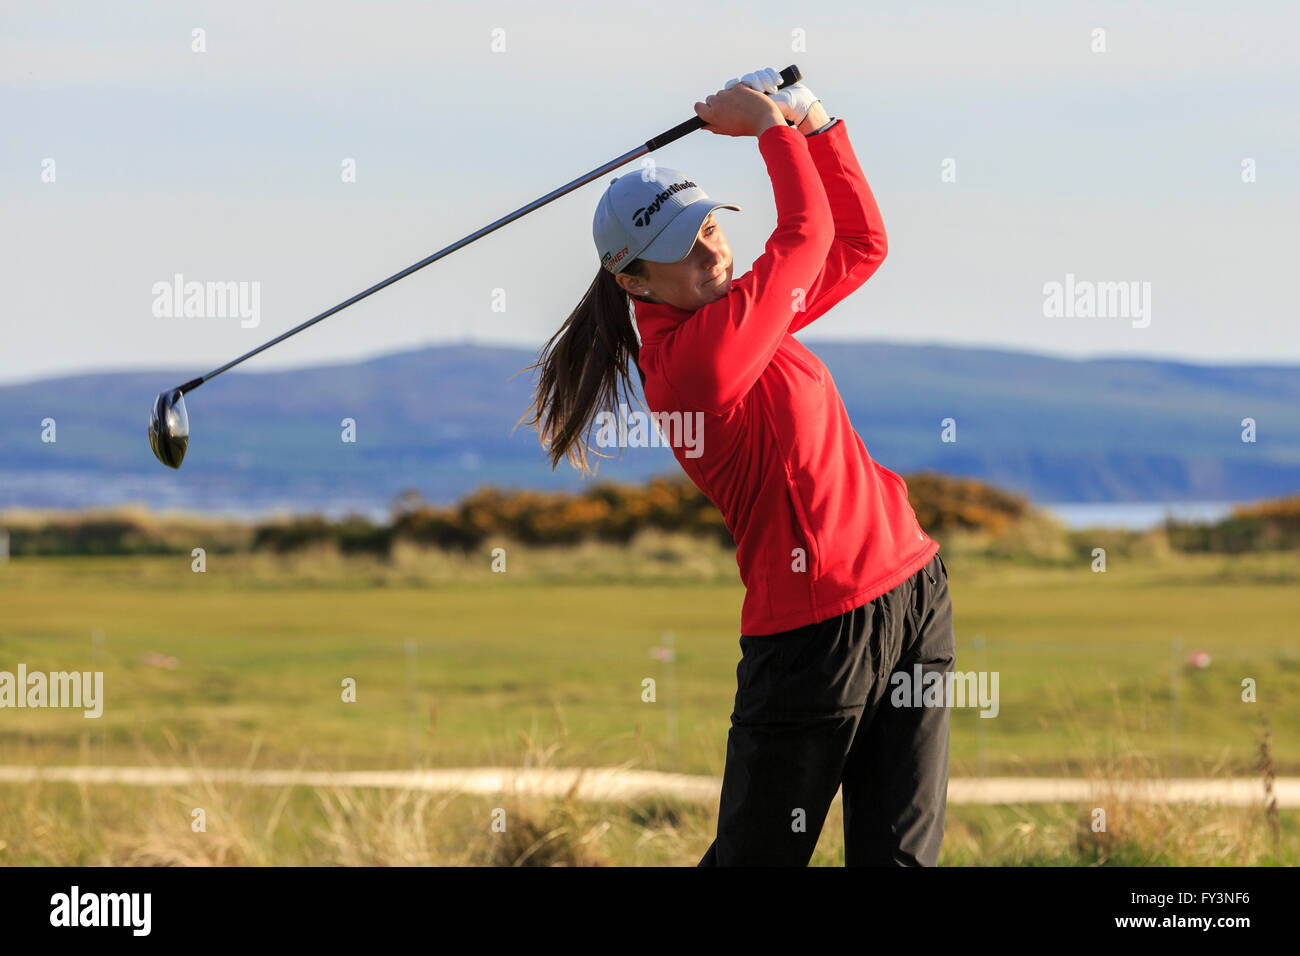 Young woman playing golf and swinging a driver, Royal Troon, Golf Club, Ayrshire, Scotland, UK Stock Photo